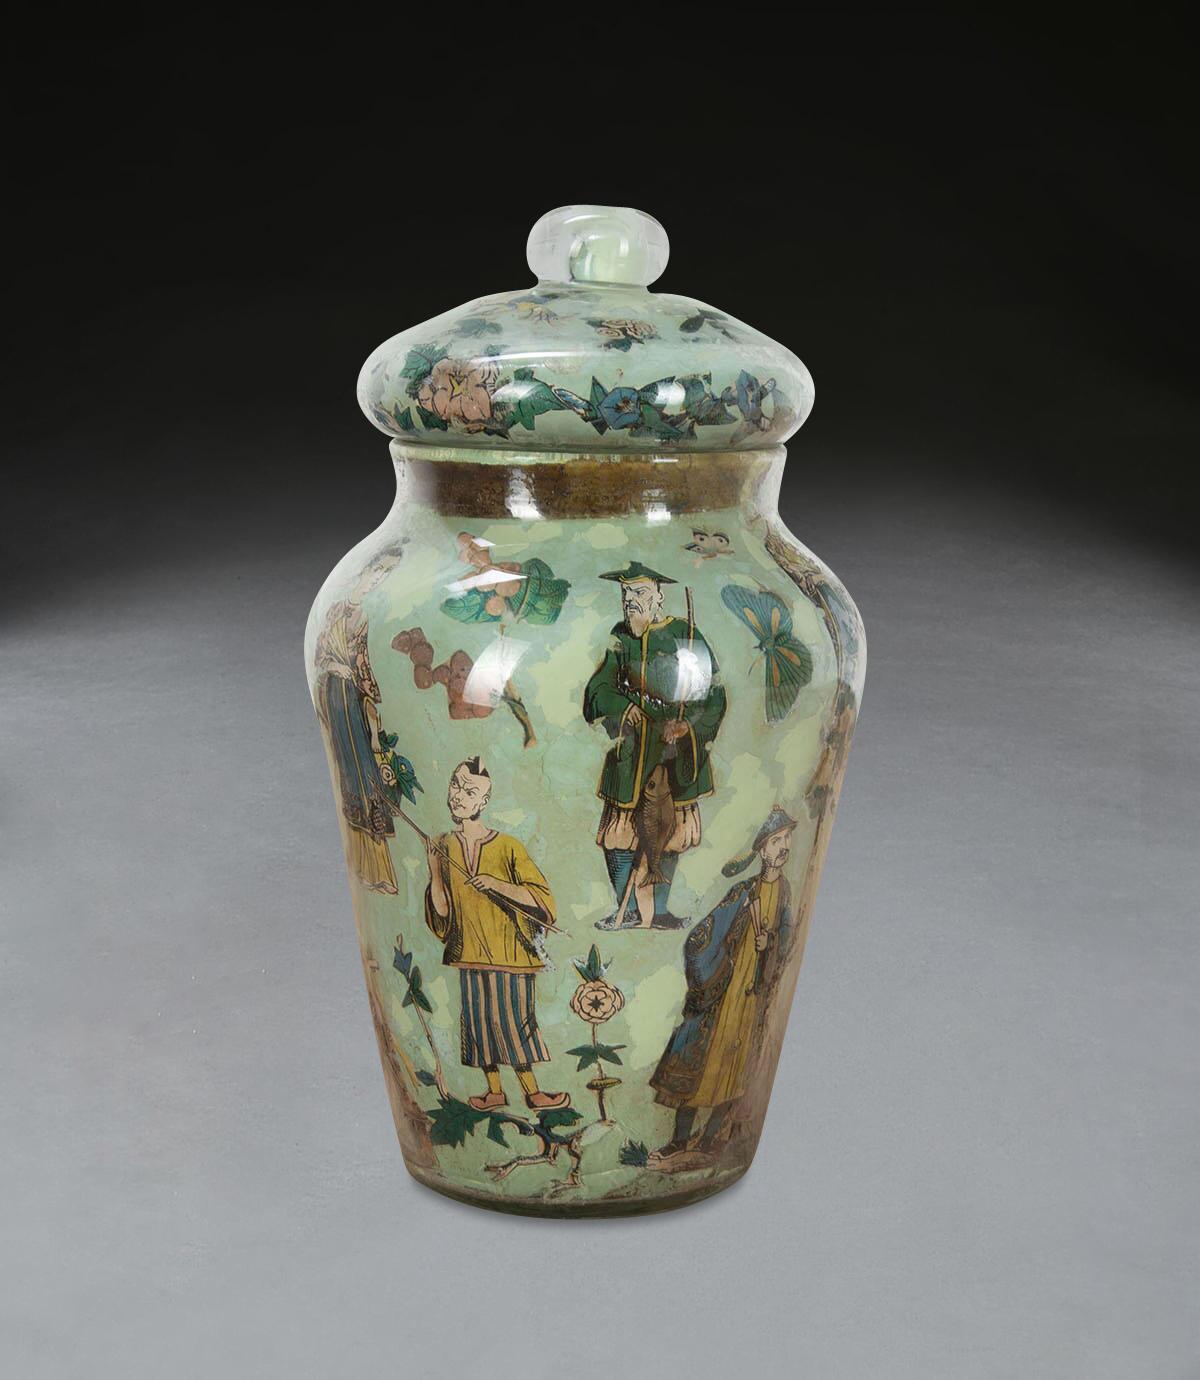 A good Regency Decalcomania vase with lid, in its original chinoiserie decoration of figures and foliage and bright green background, in good condition with no chips, cracks or flaking. Circa 1830.

H: 24 cm (9 7/16